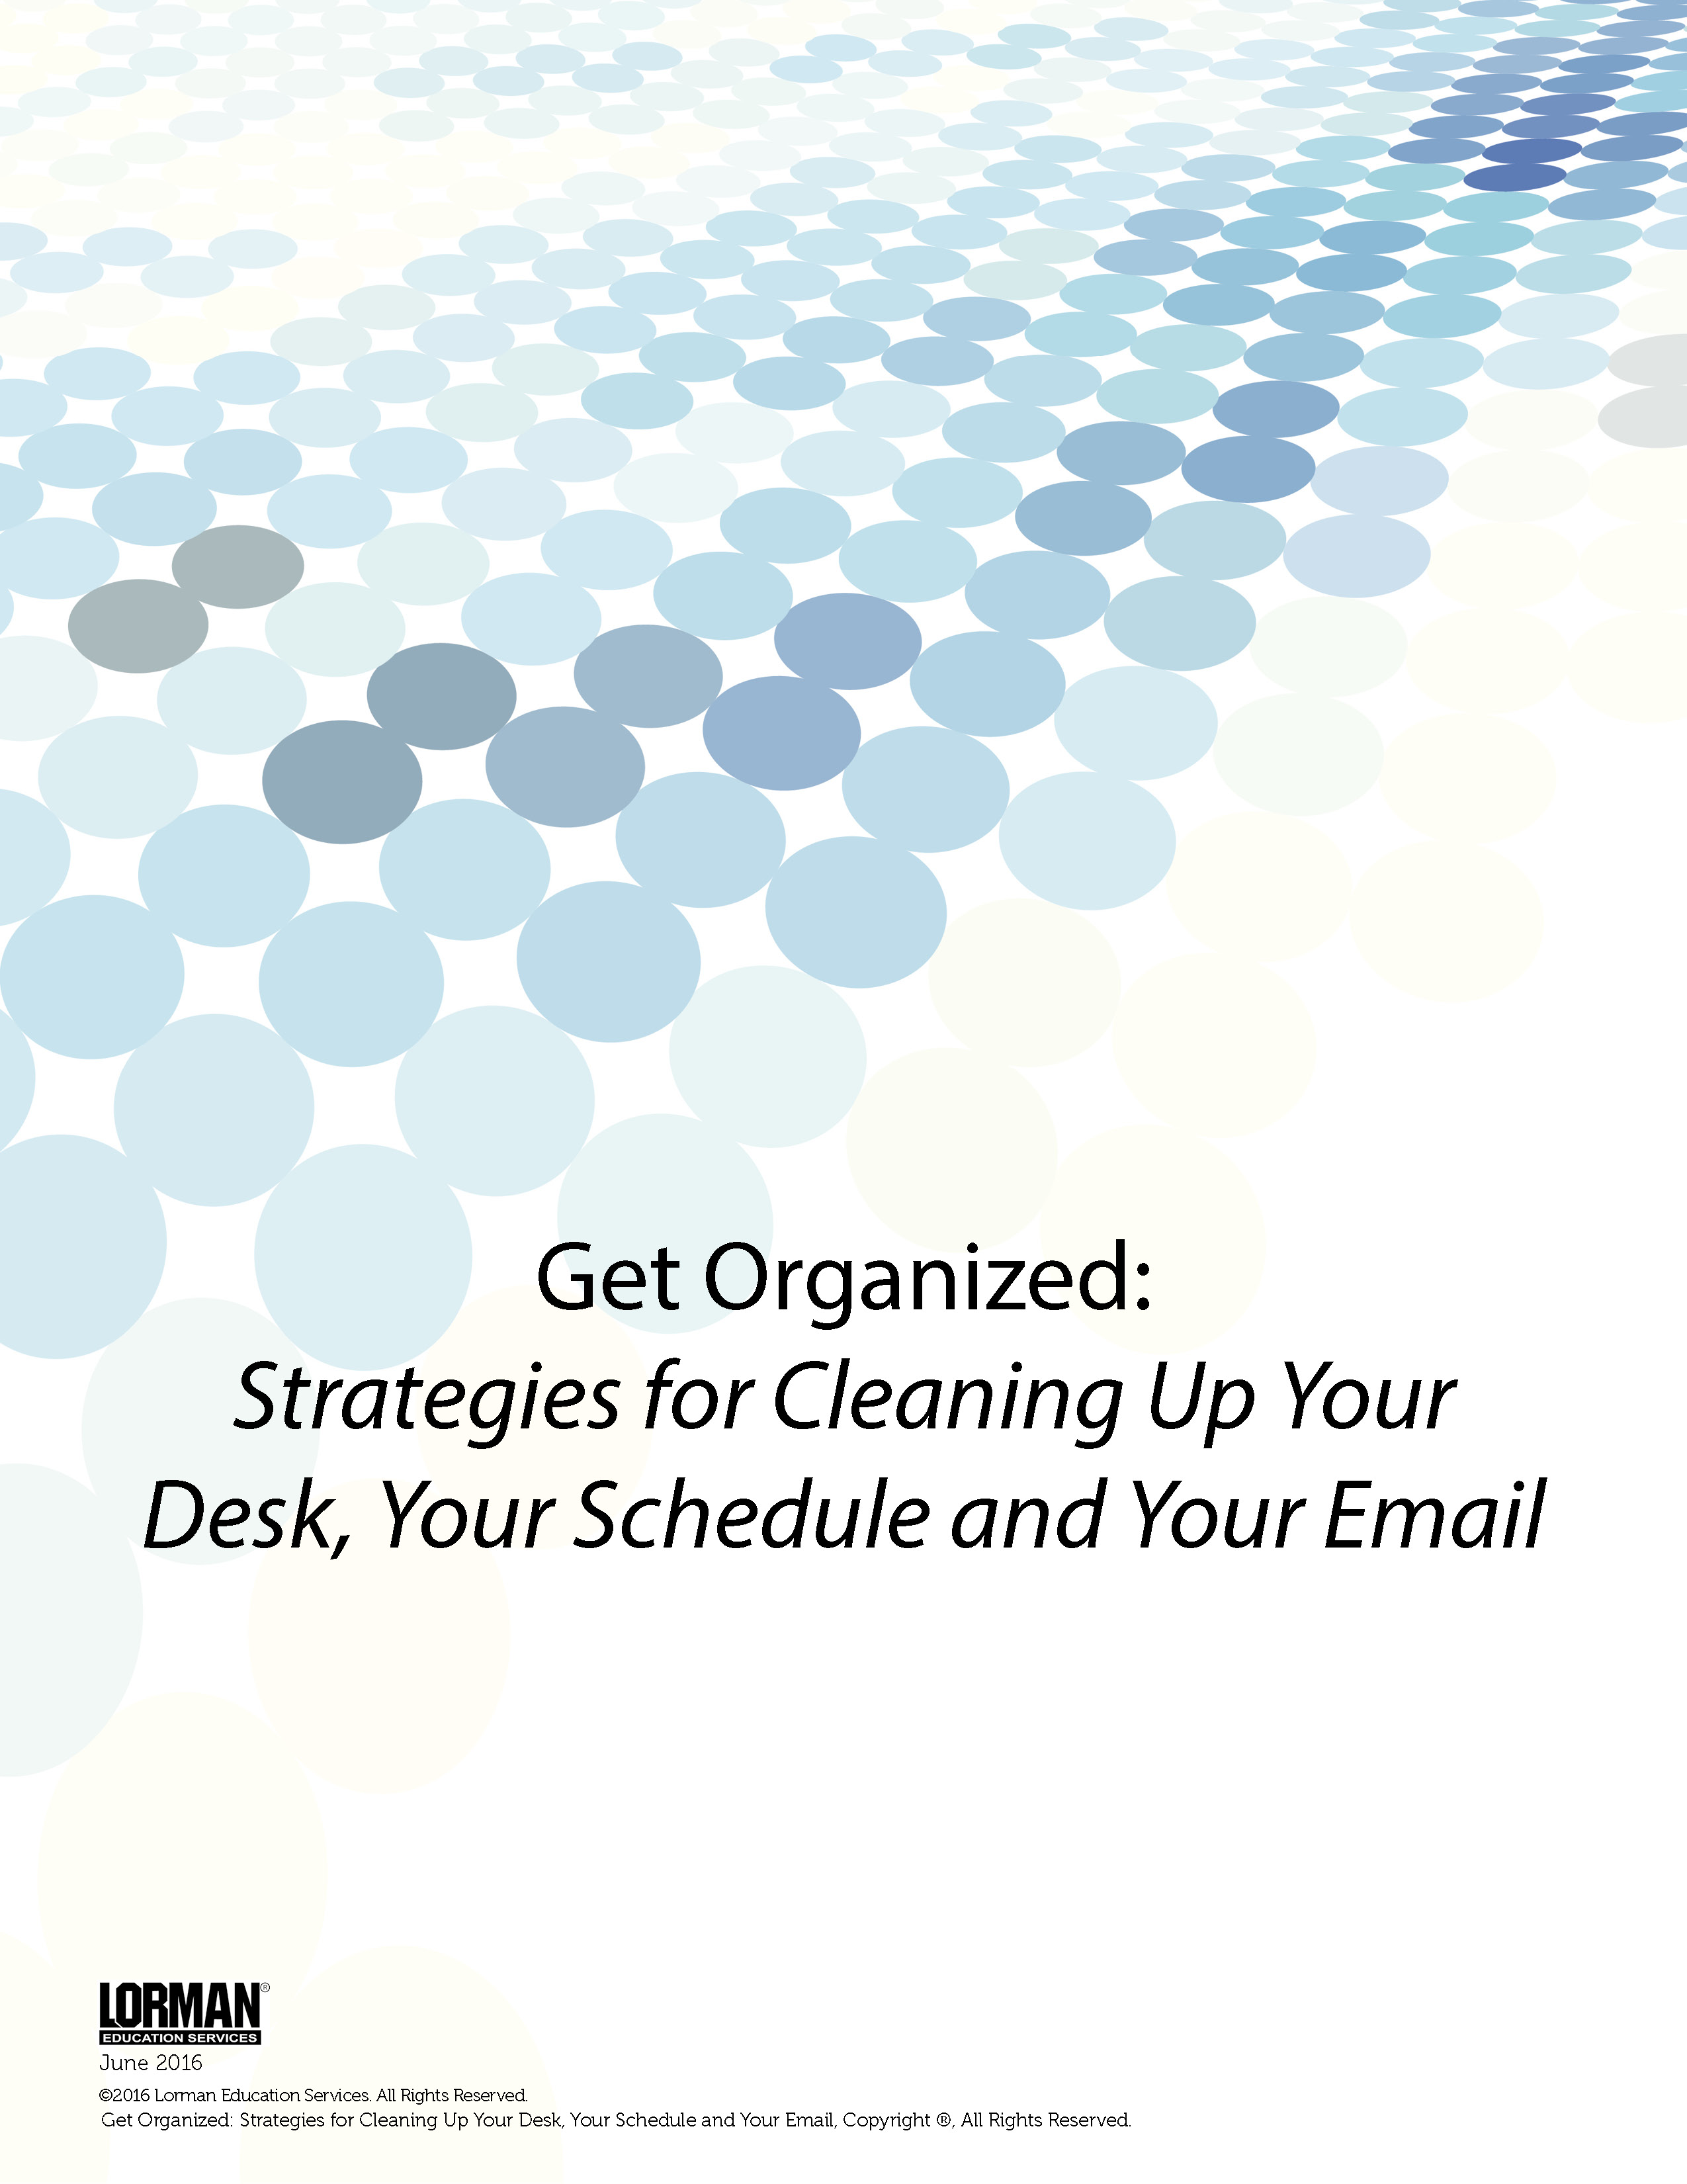 Get Organized: Strategies for Cleaning Up Your Desk, Your Schedule and Your Email